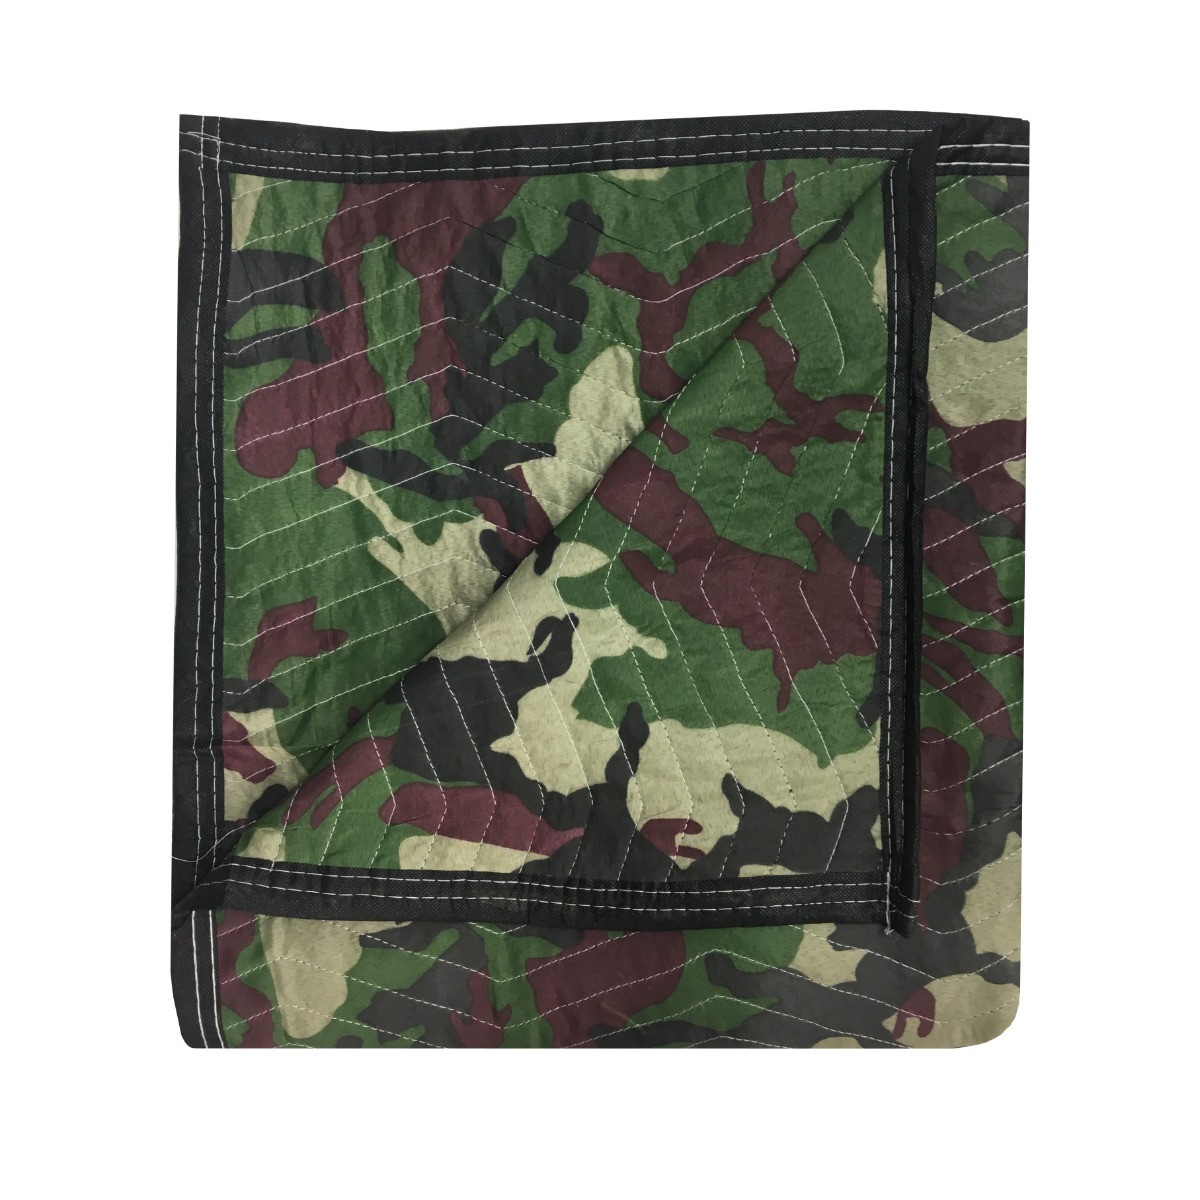 UBMOVE Camouflage Moving Blankets 65lbs/doz (2 Pack)